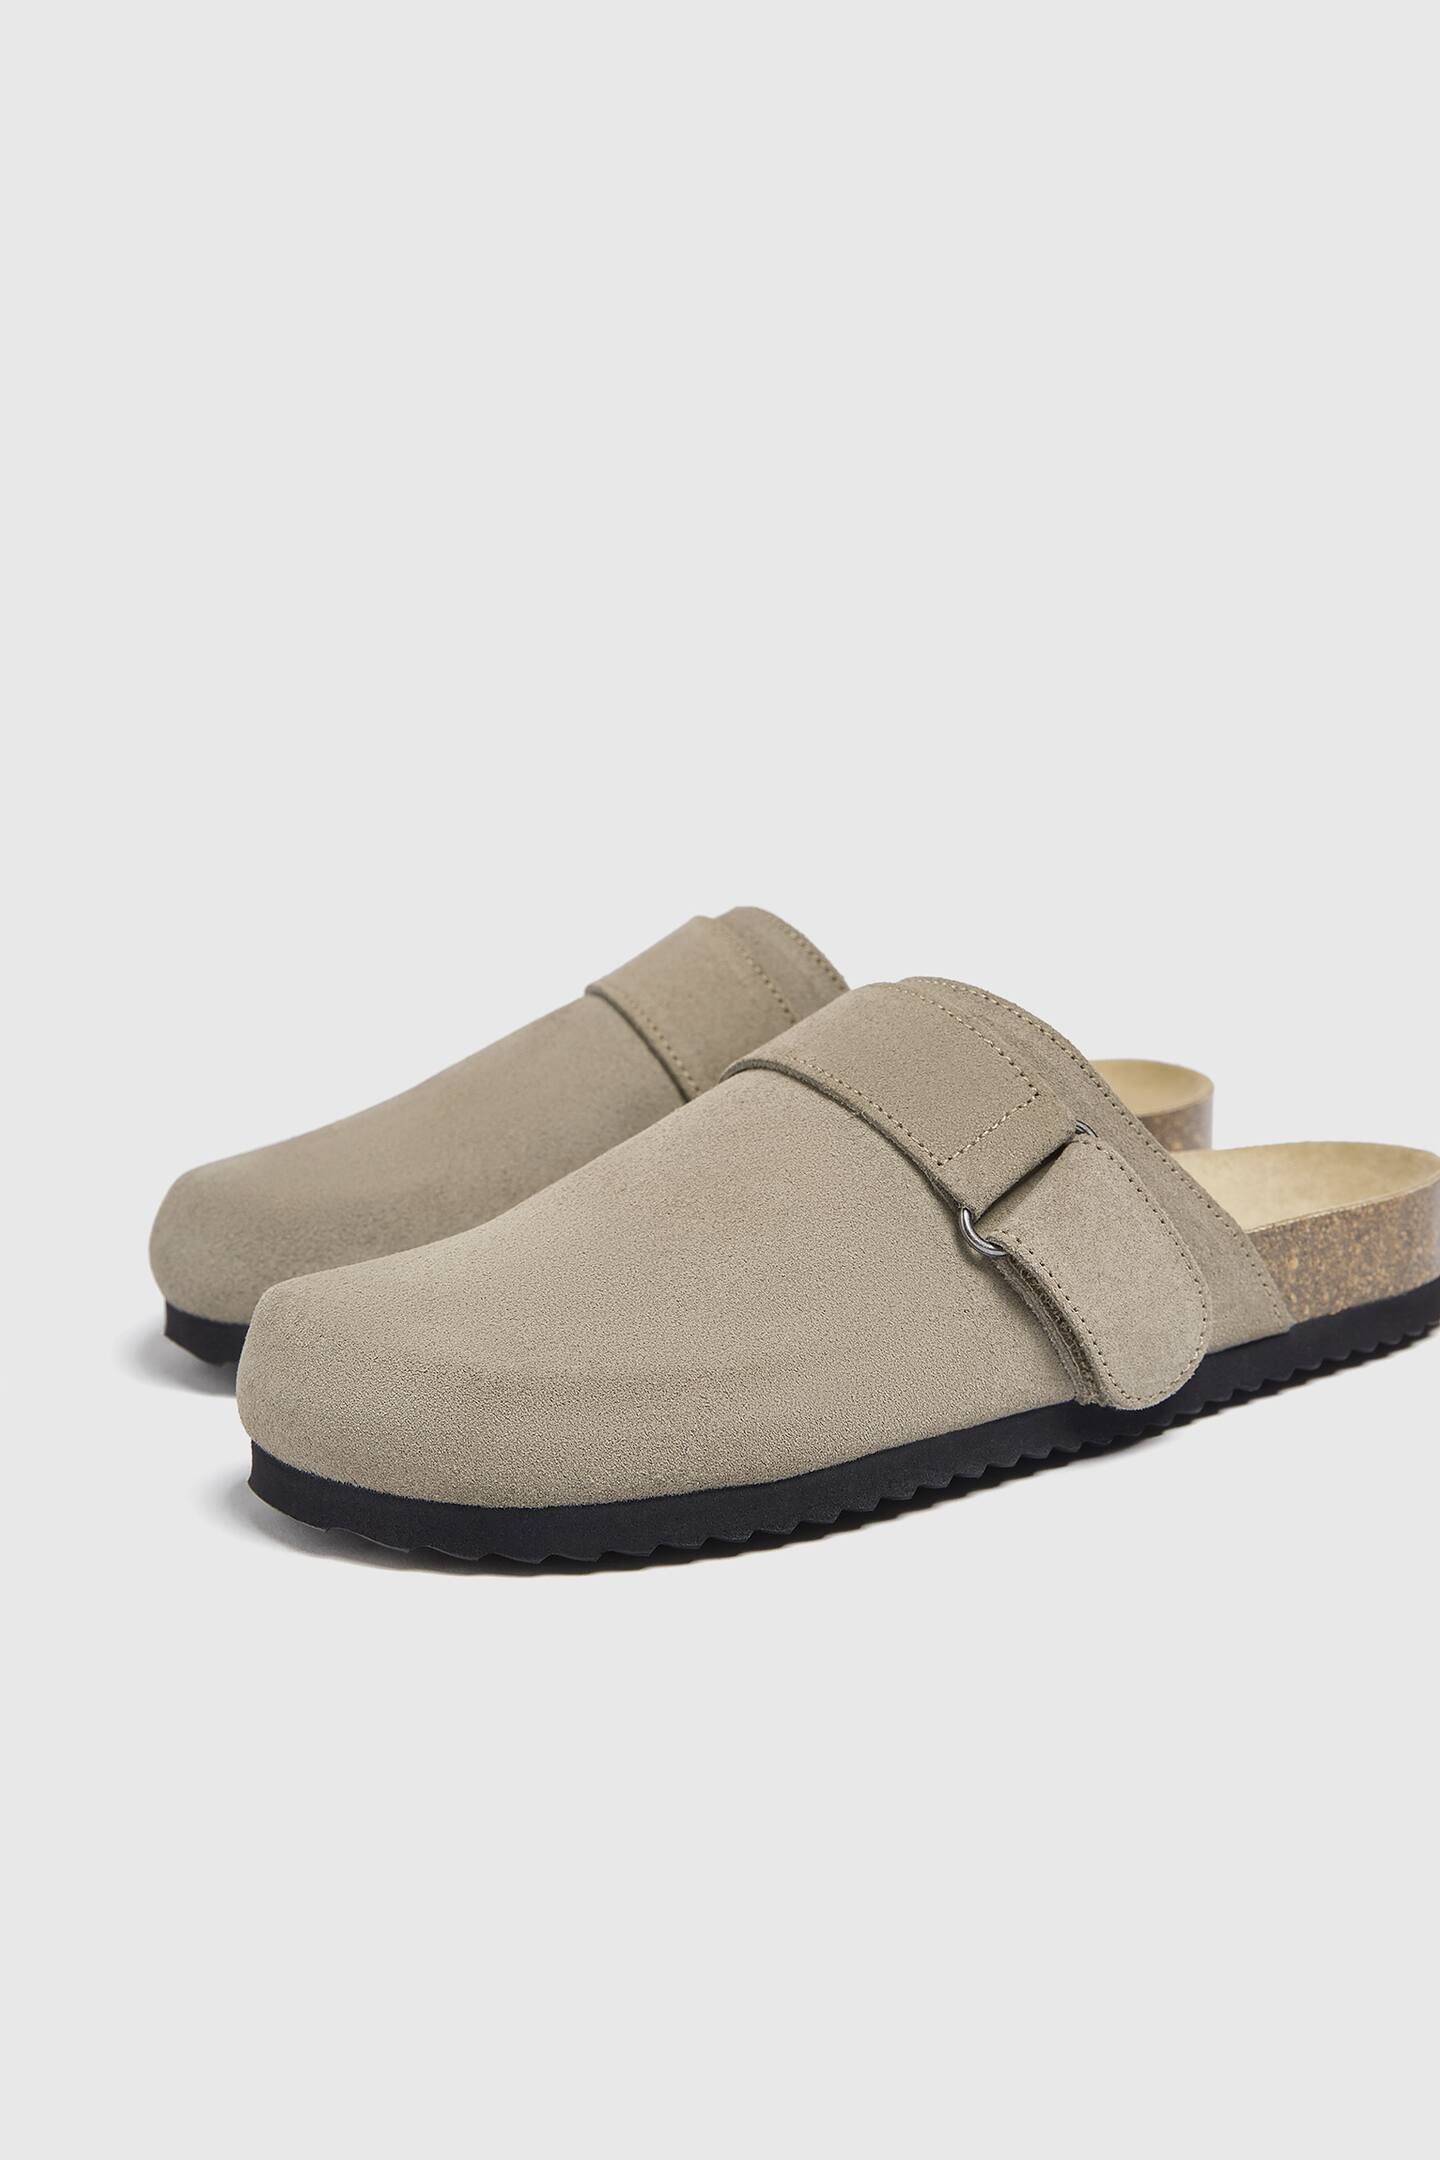 LEATHER CLOG SLIPPERS | PULL and BEAR UK